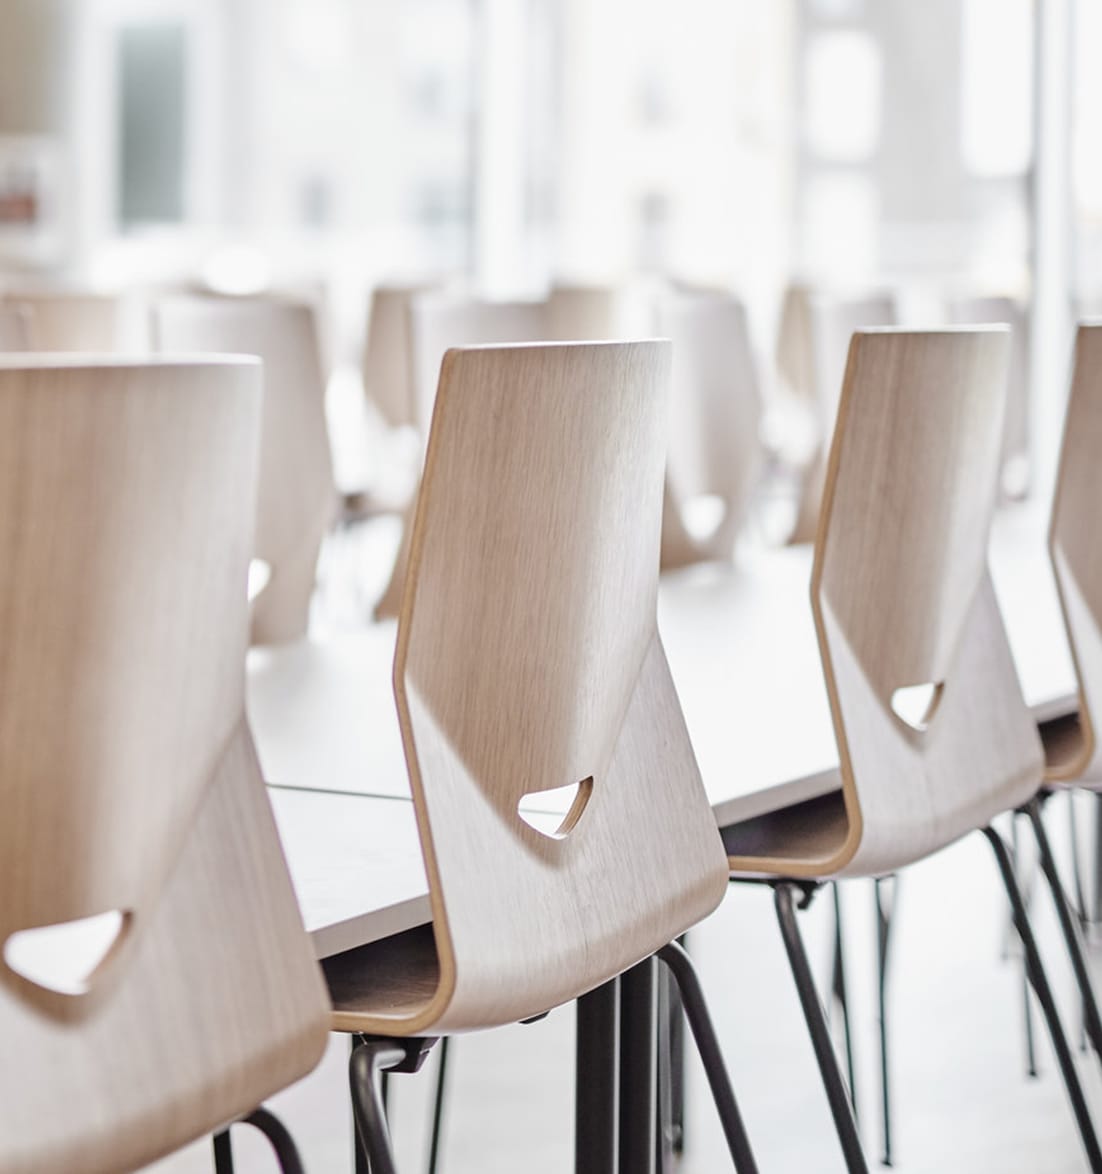 A row of wooden chairs in a conference room.